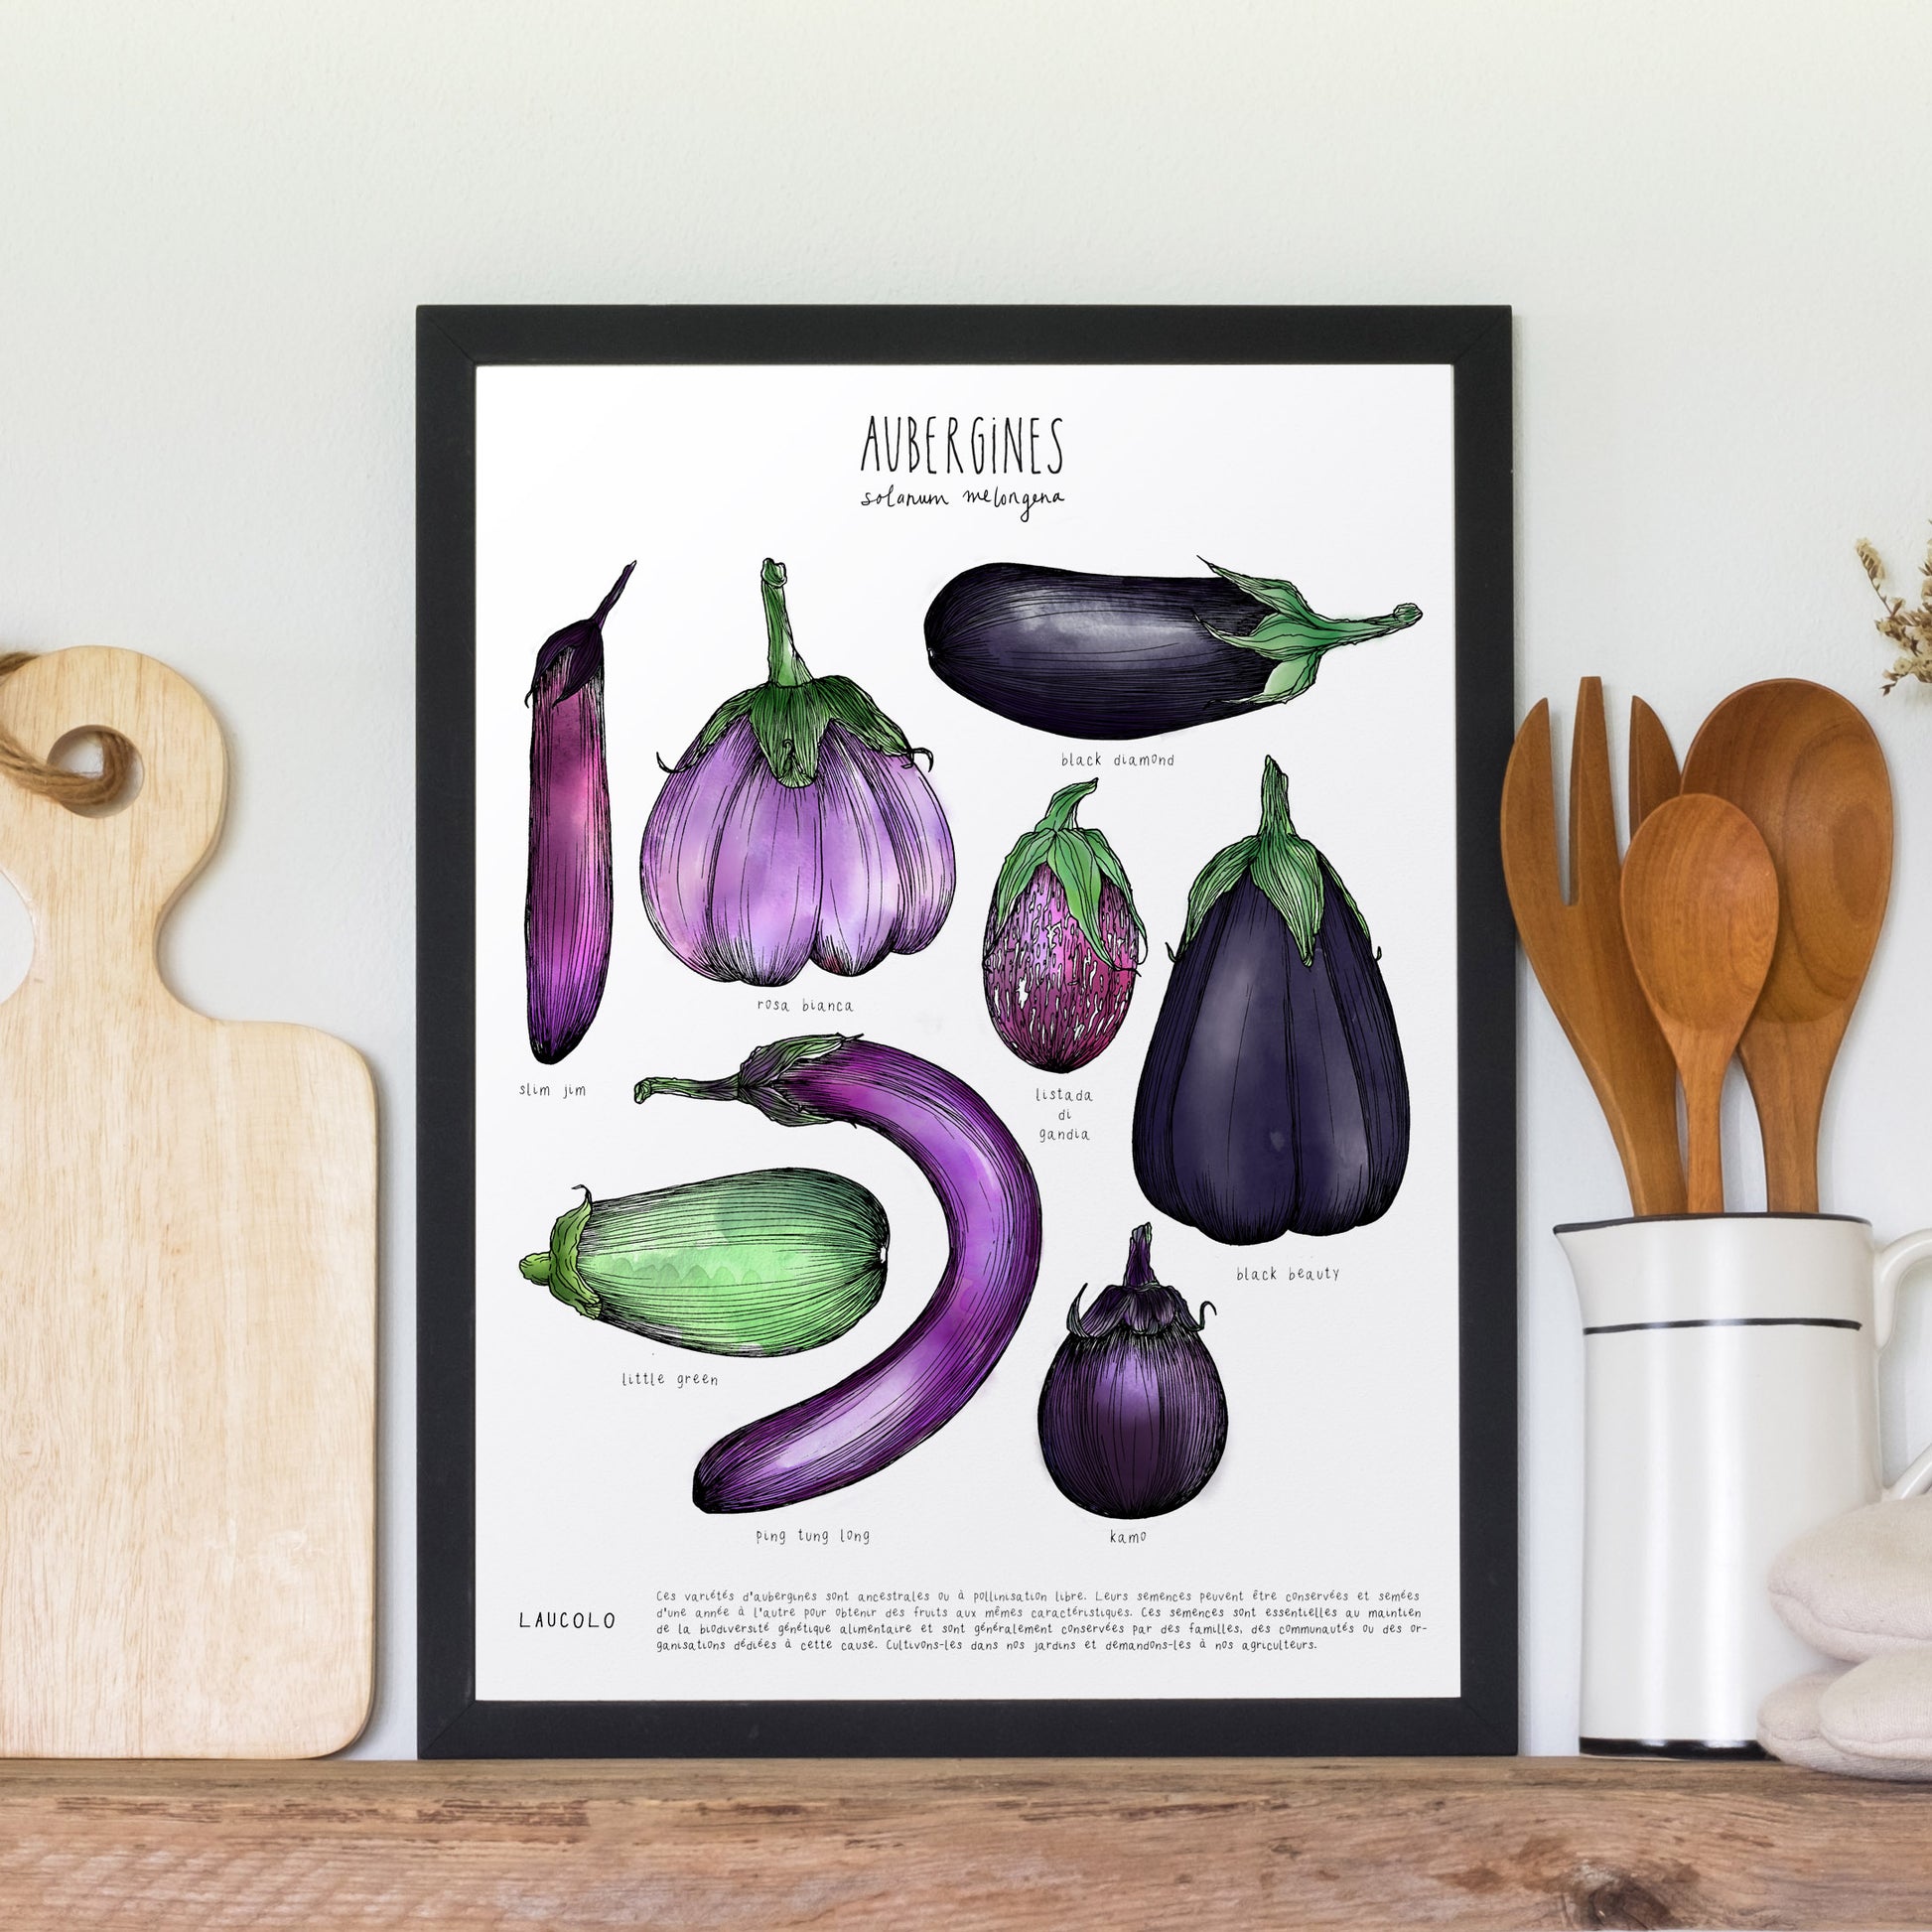 Eggplant illustration poster in black frame leaning against wall next to wood cutting board and jar with wood utensils